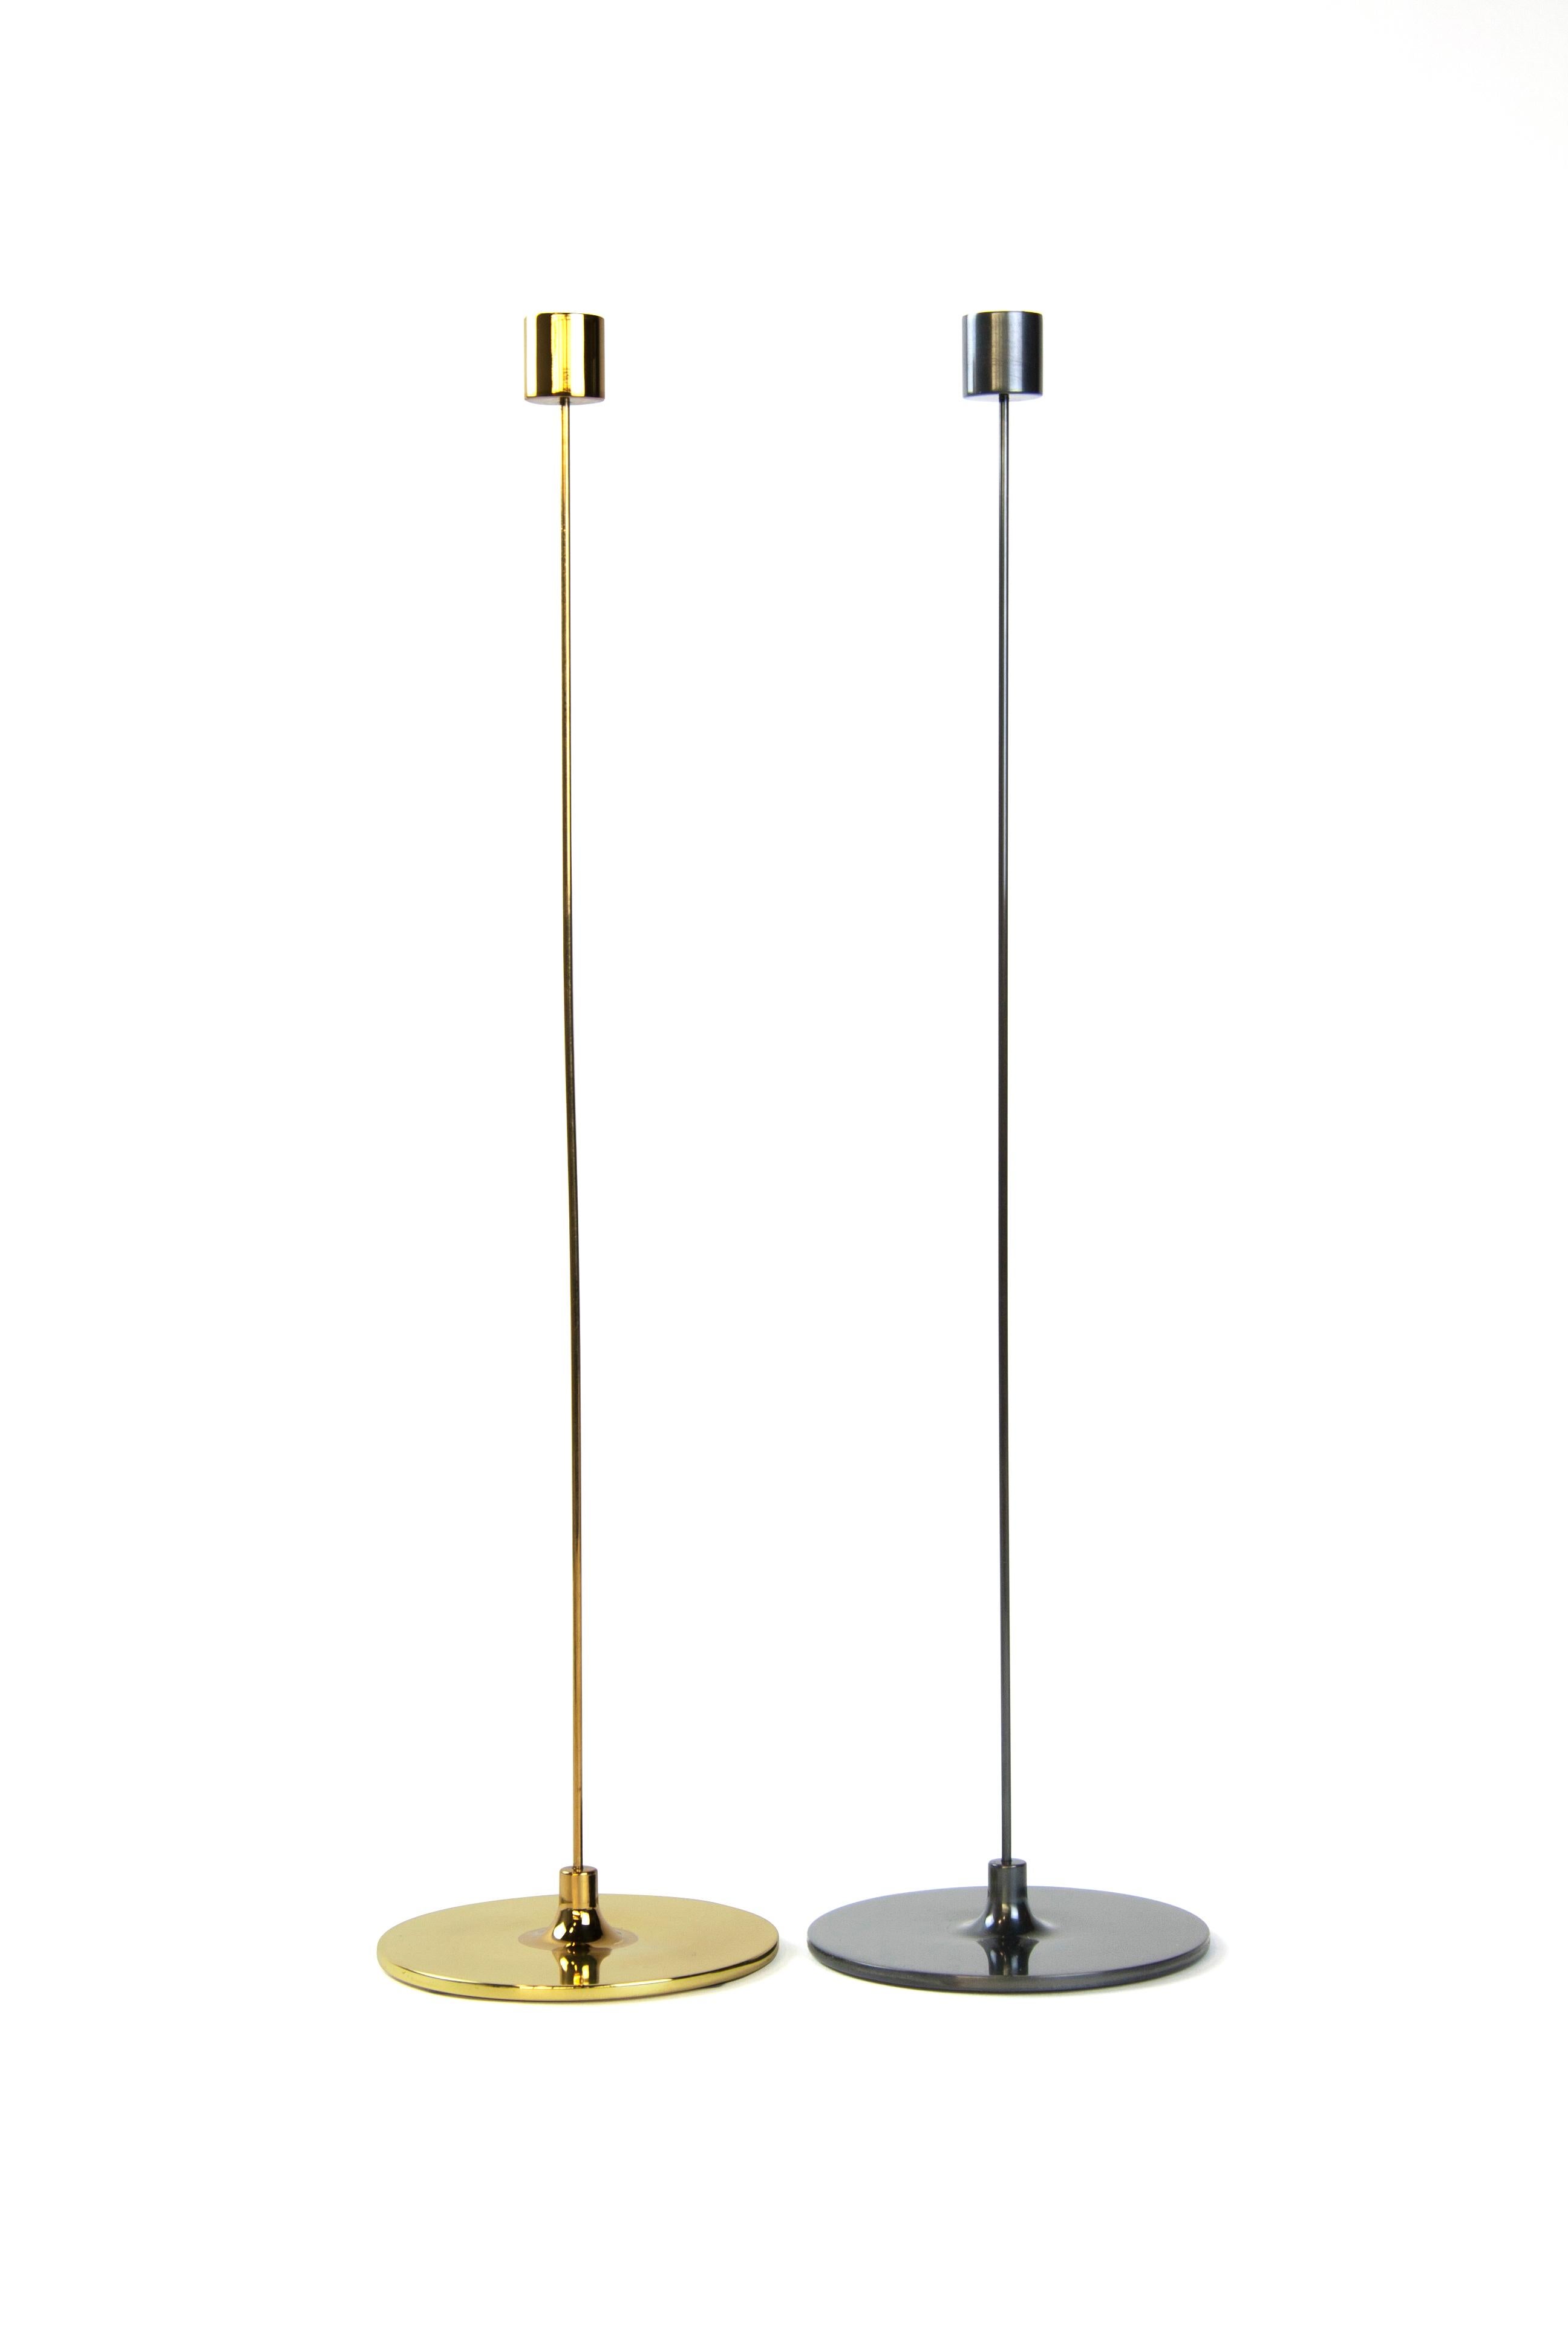 Large pin brass candlestick by Gentner Design
Dimensions: D 12.7 x H 50.8 cm.
Materials: polished tarnished brass.
Available in polished tarnished brass and darkened brass.
Available in small, medium and large.

With an 12”, 16”, or 20”